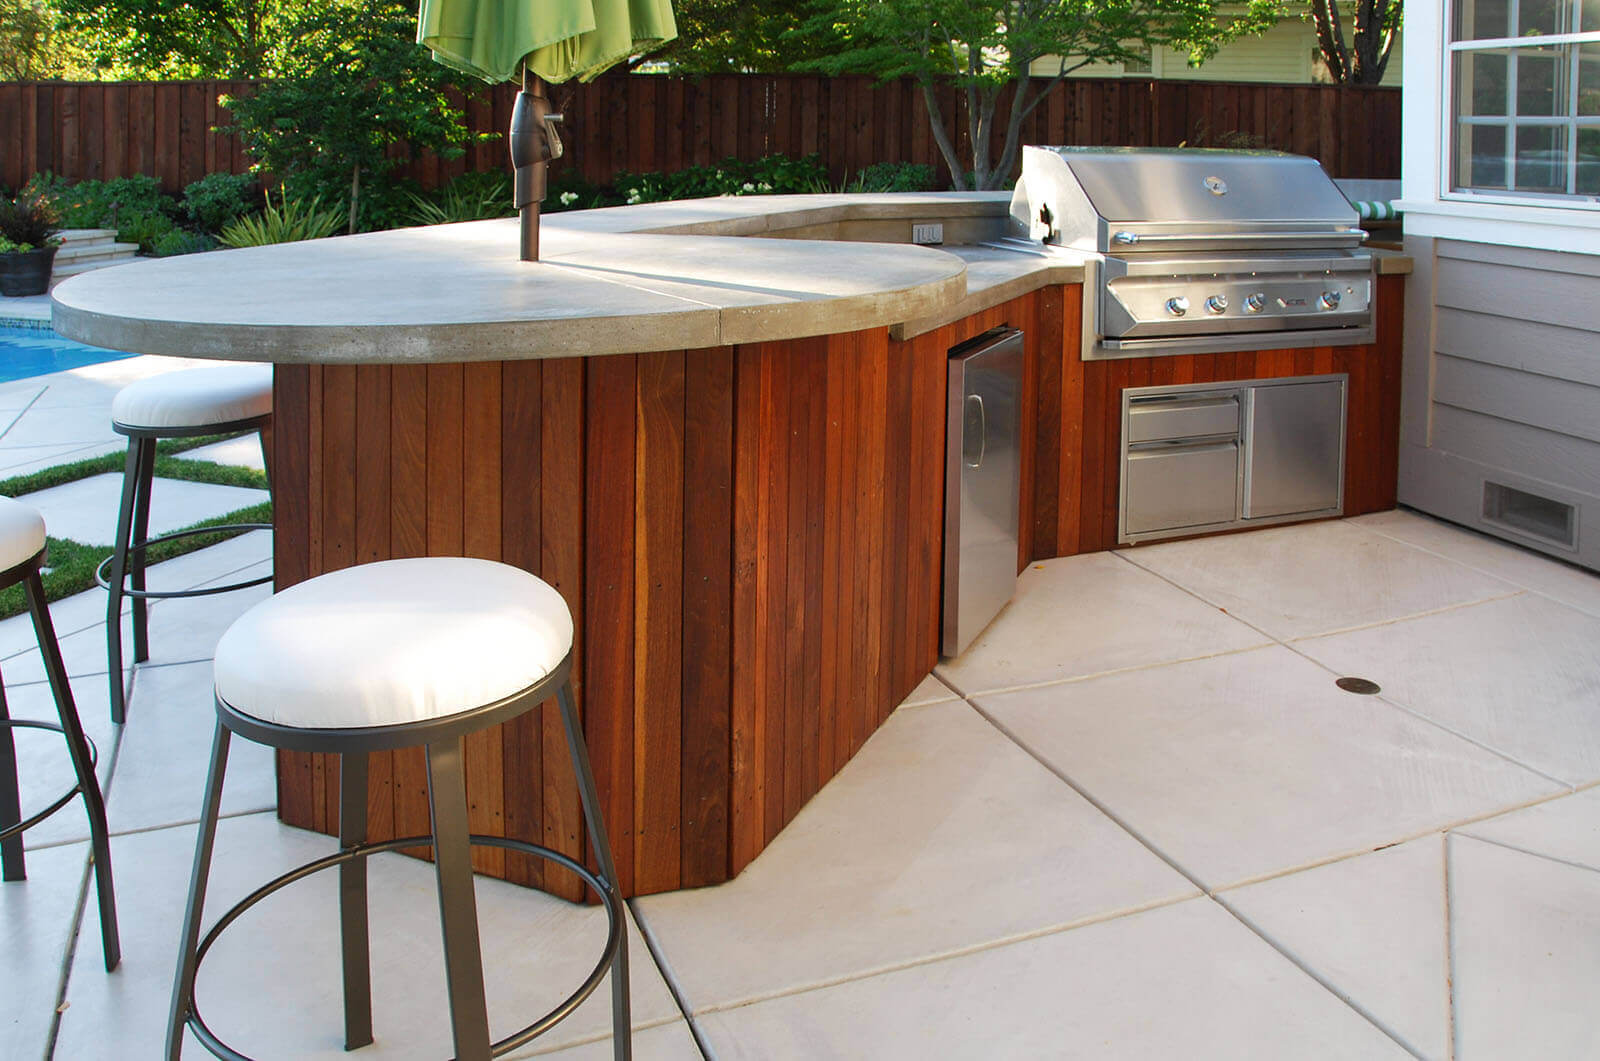 Stone tile counter top with center umbrella, custom grill and storage section with bar-stools and colorful wood design